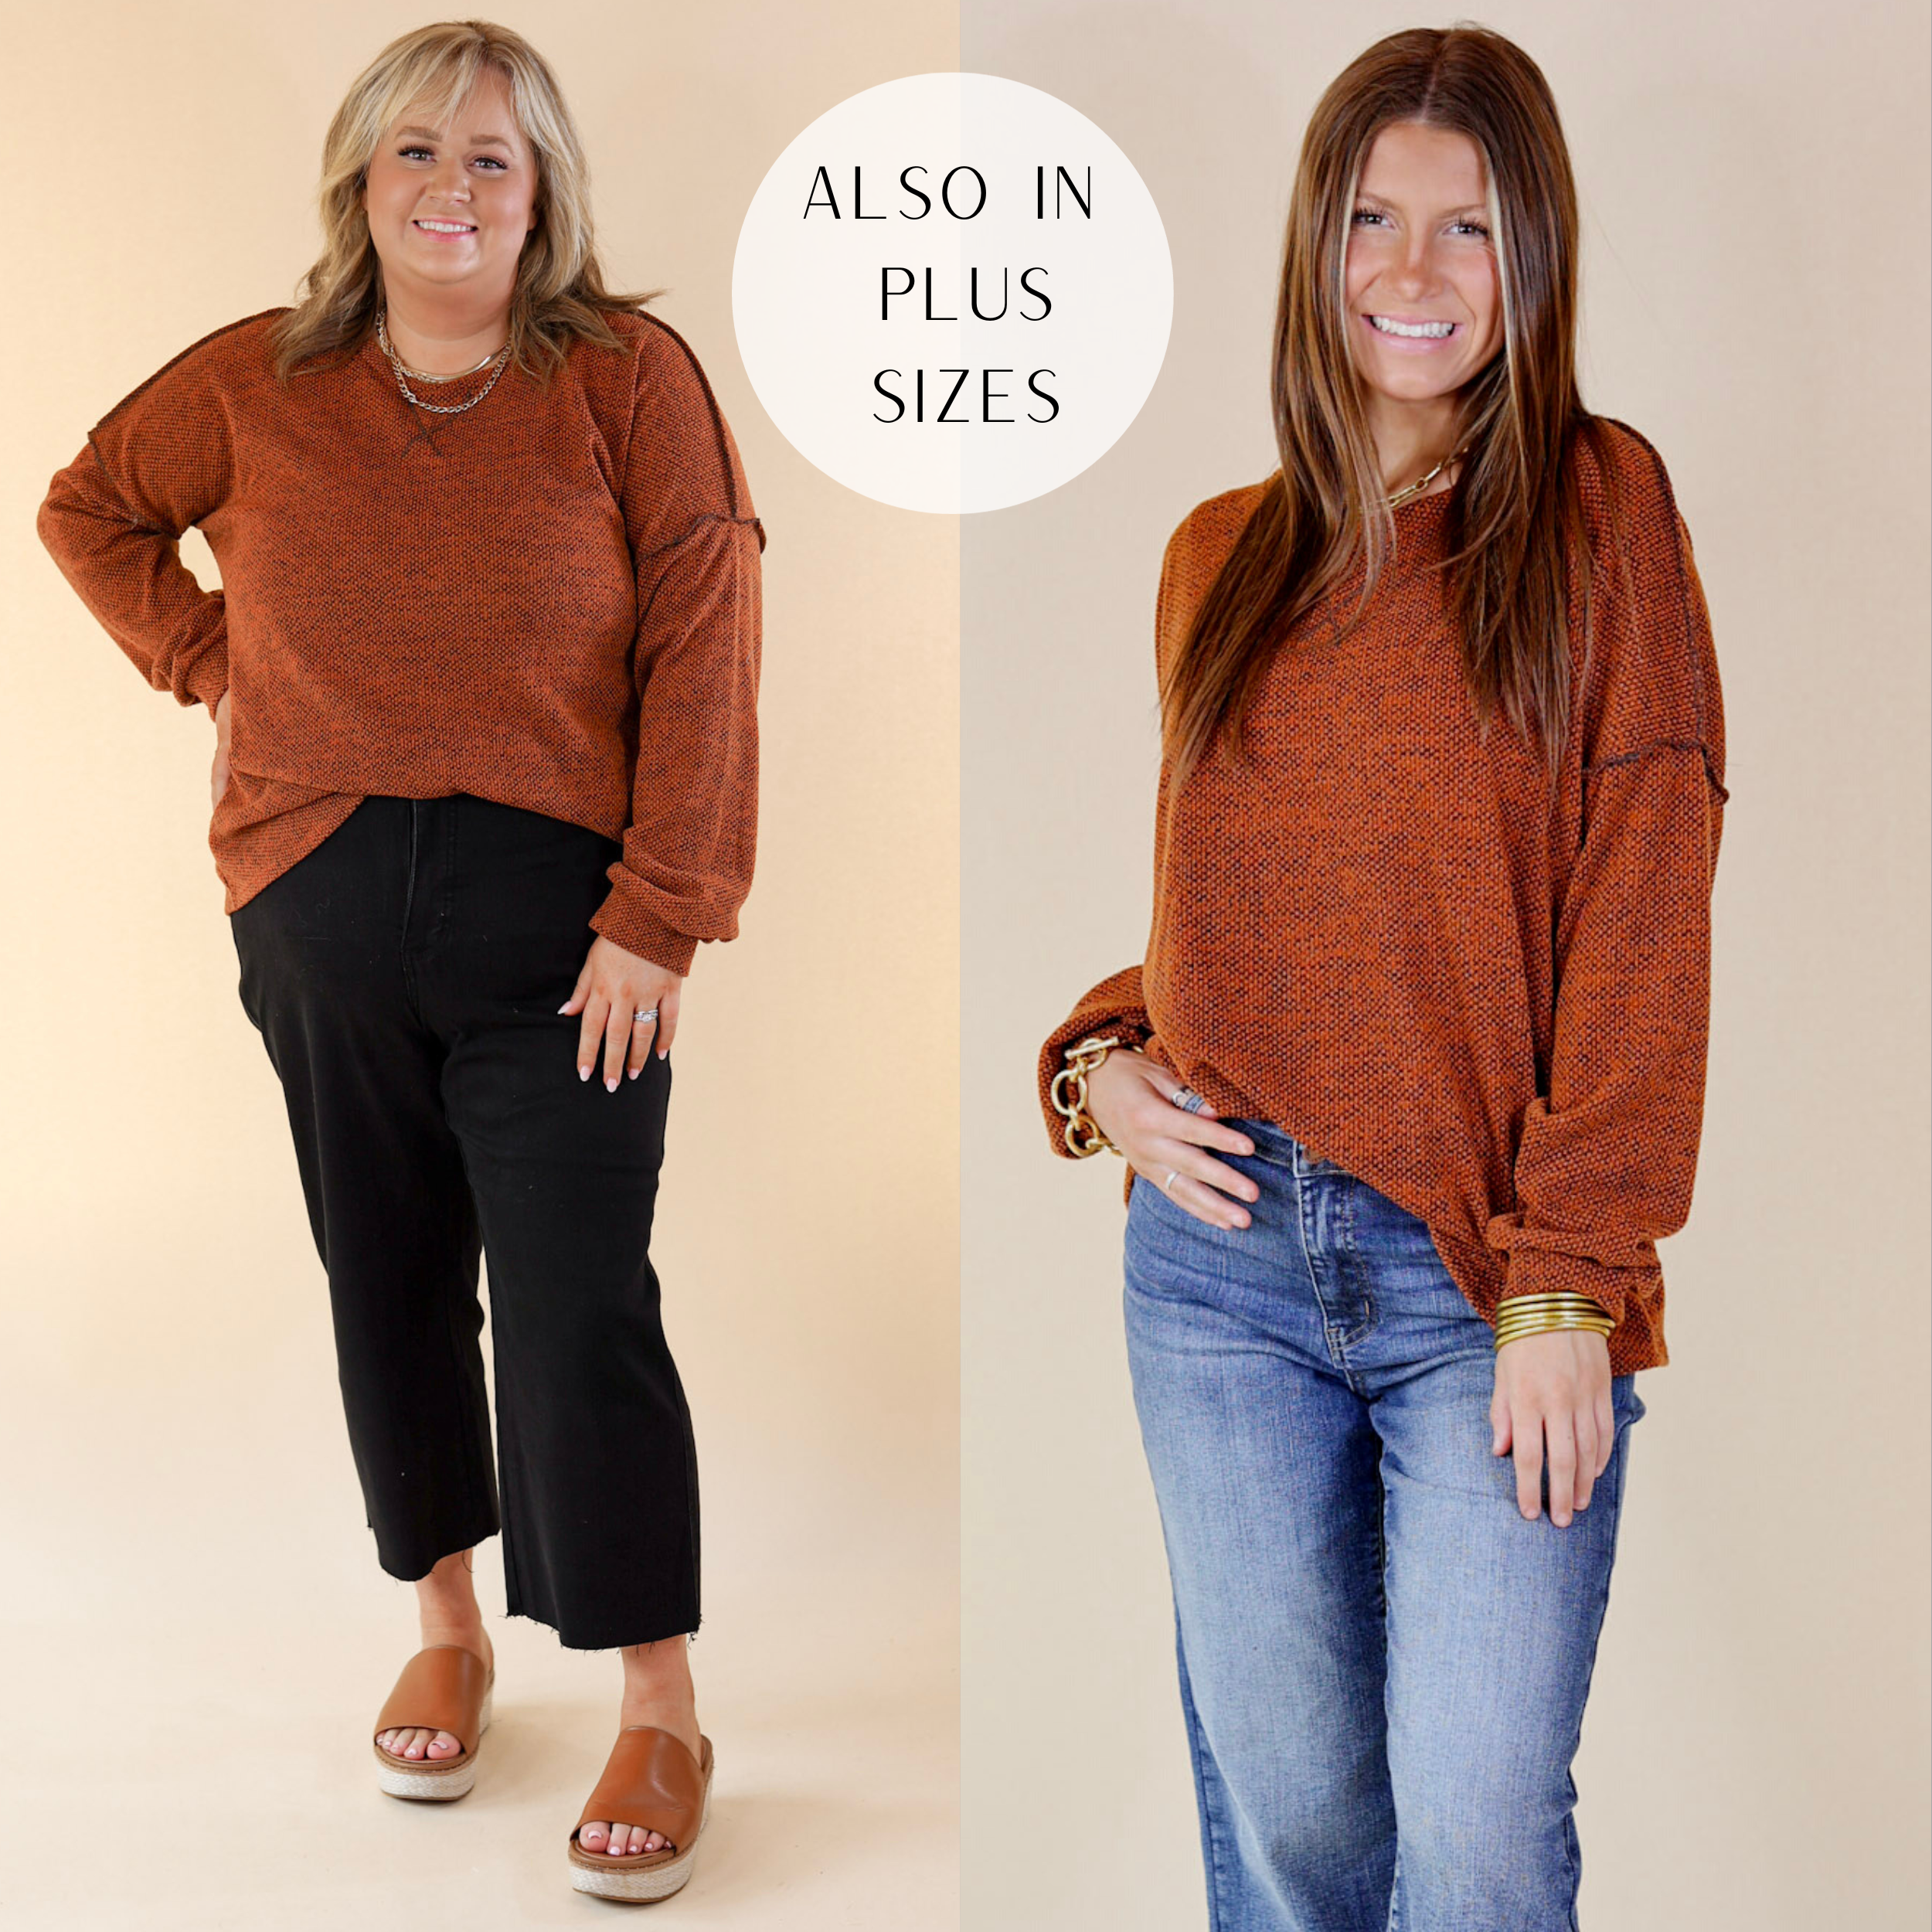 In the picture the model is wearing a fall festival long sleeve knit top in rust orange with a white background 